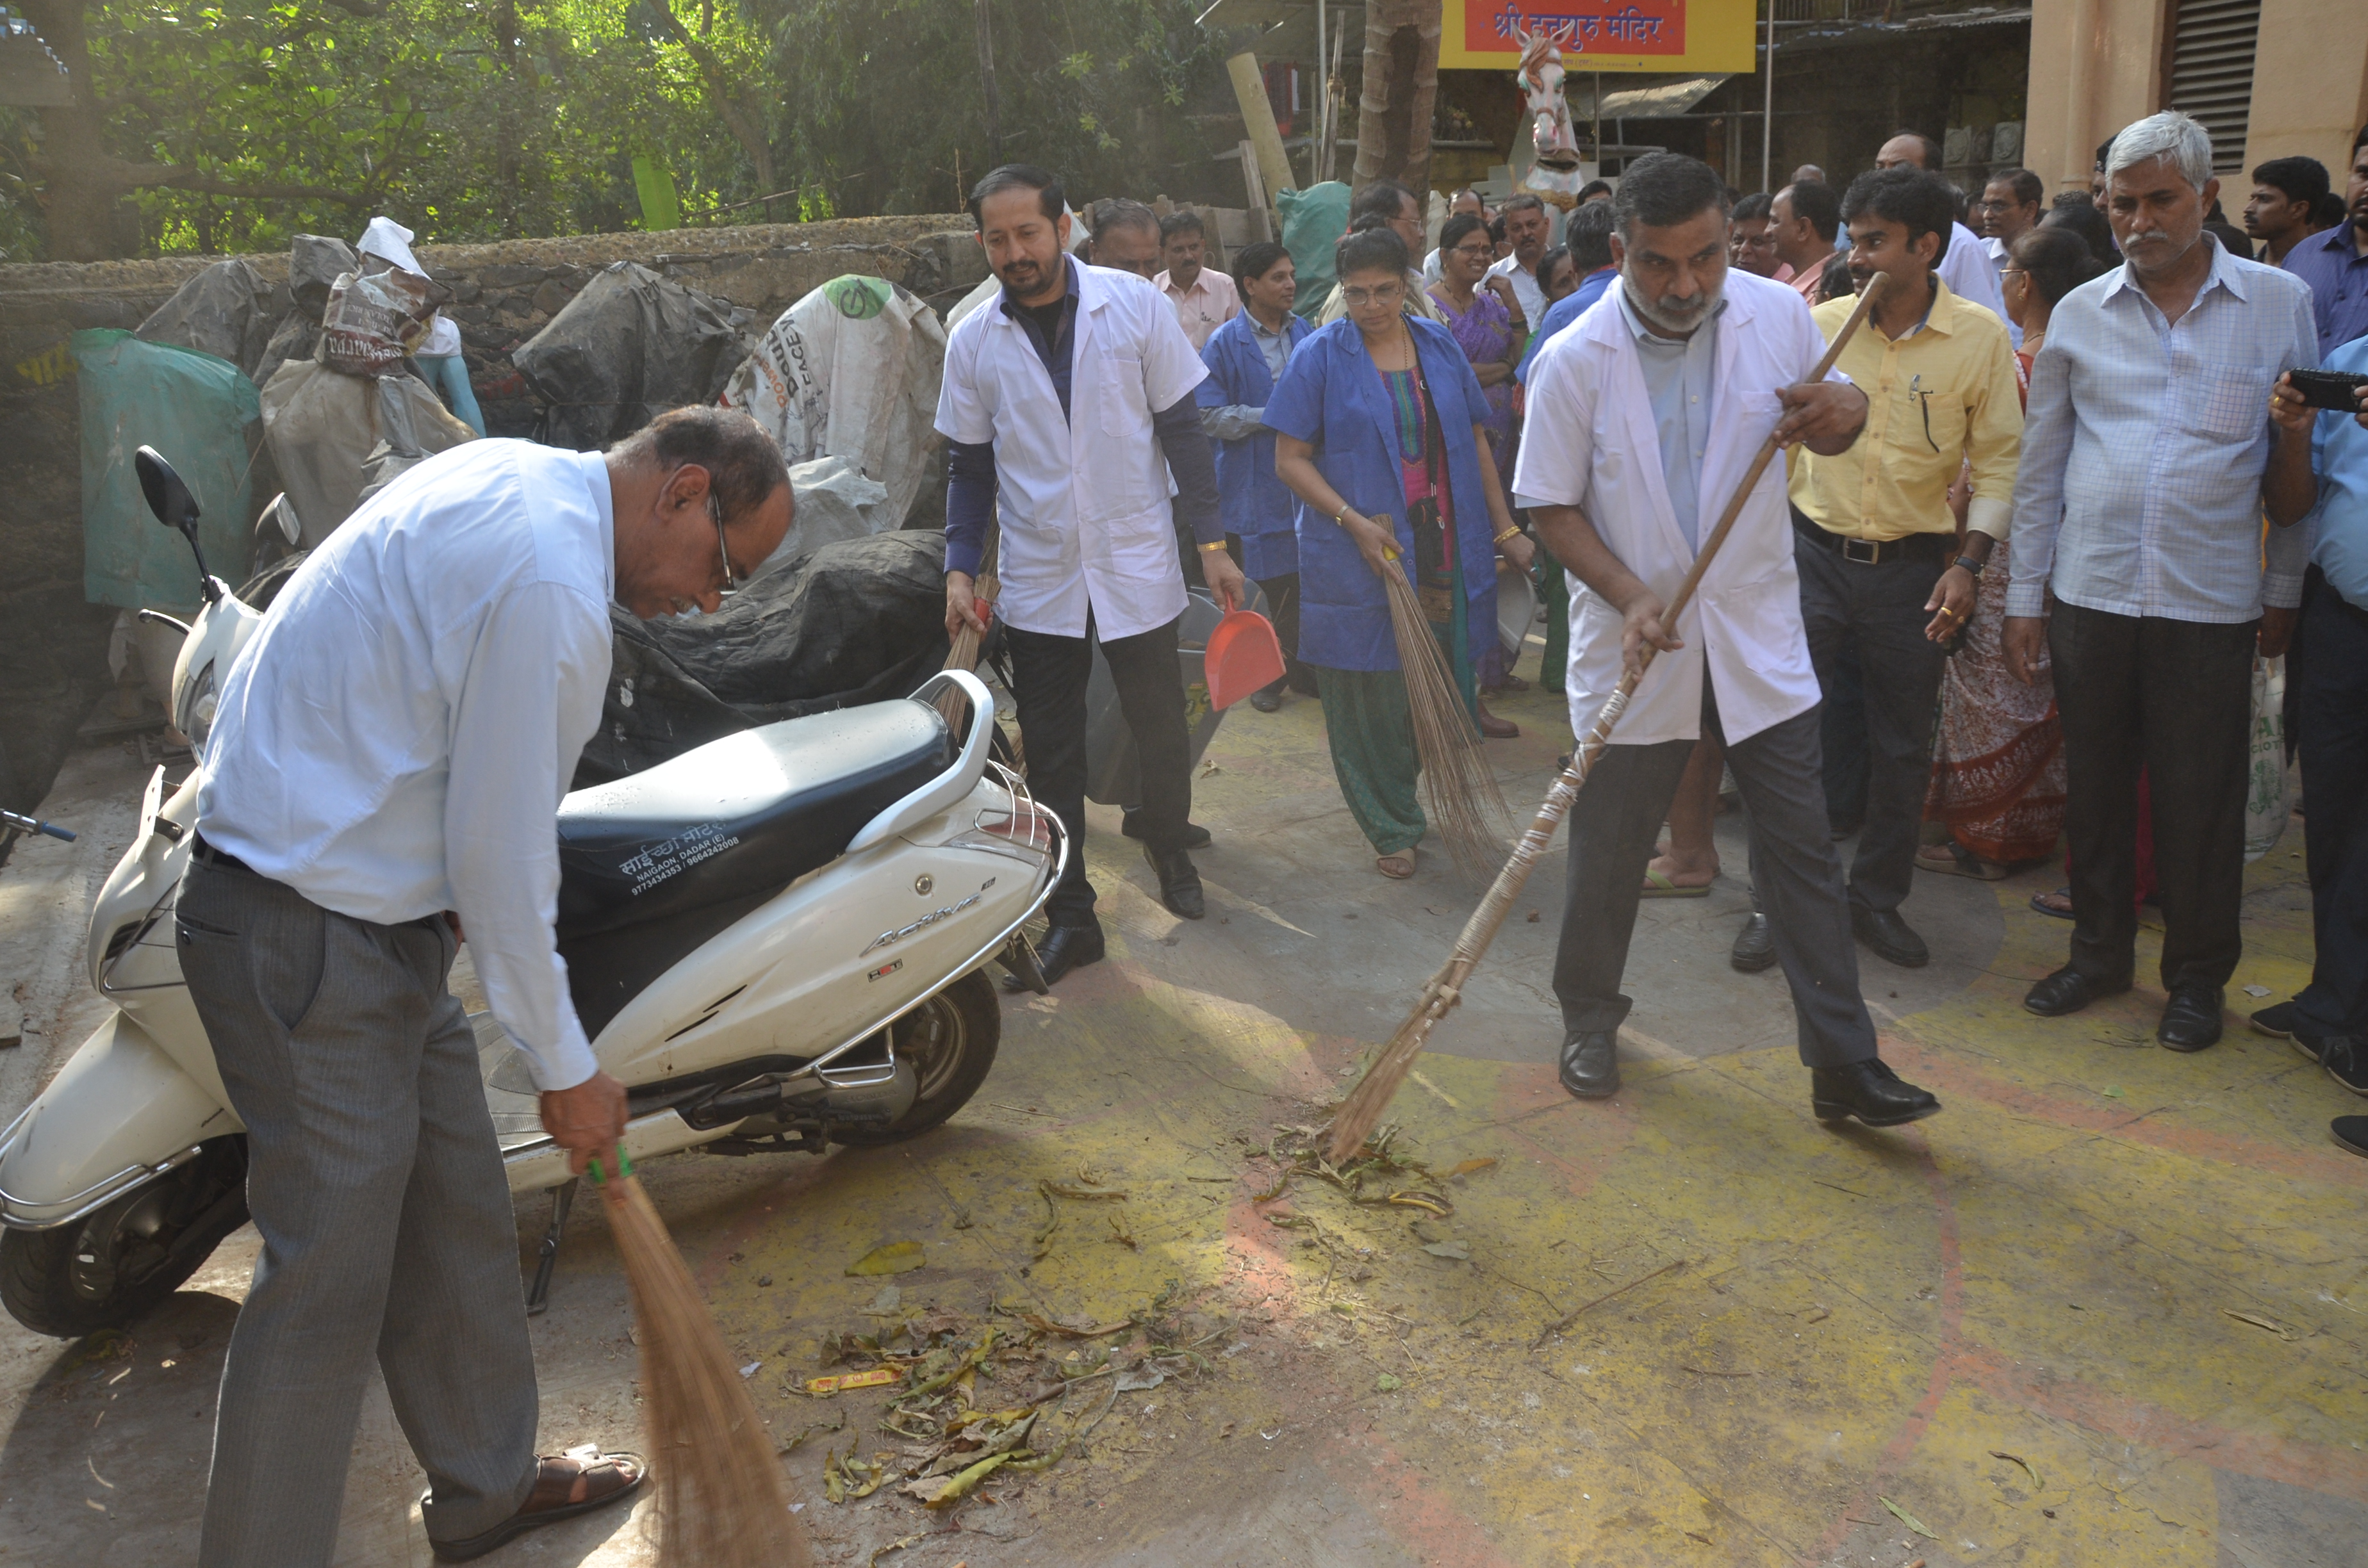 Honorable Shri A. Madhukumar Reddy, Joint Secretary, MOT and WRO officials cleaning the road and let people inspiring for the cleaness on the occasion of Swachh Bharat Pakhwada 2017